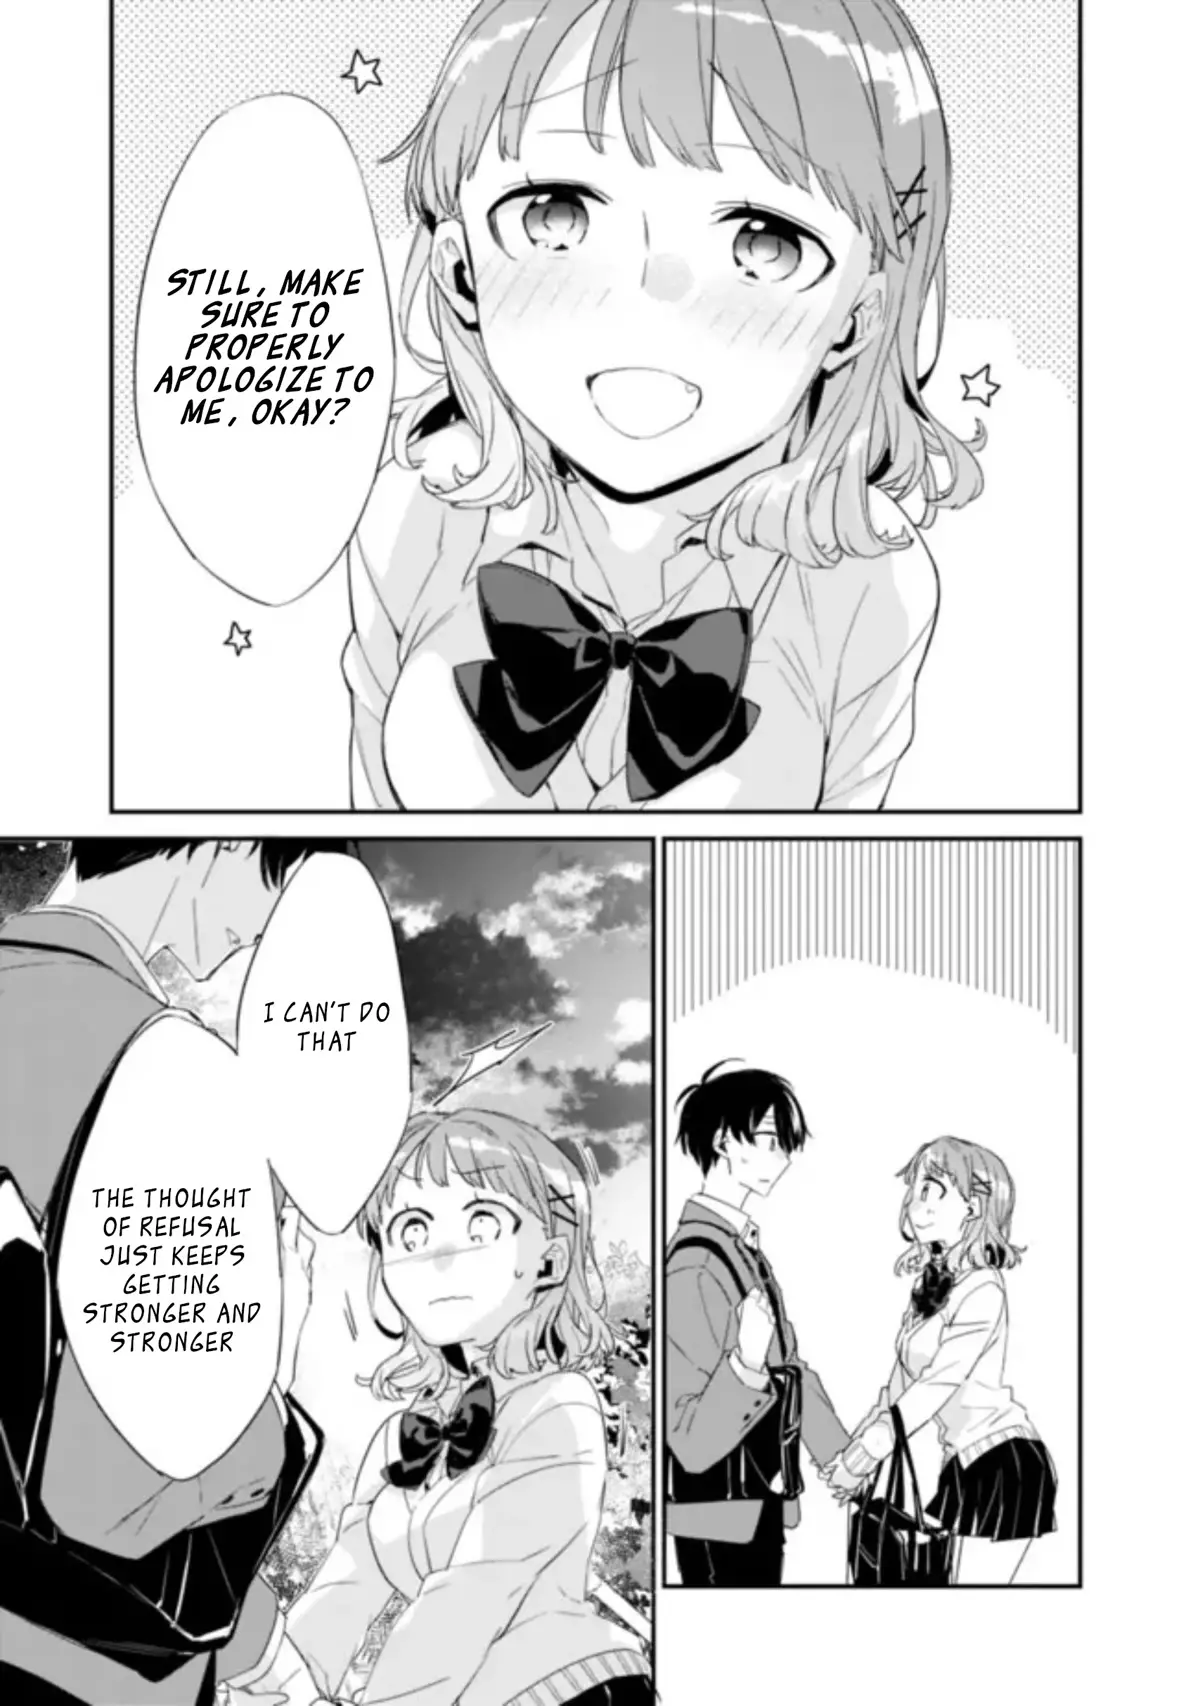 I’M Sick And Tired Of My Childhood Friend’S, Now Girlfriend’S, Constant Abuse So I Broke Up With Her - 2.2 page 9-ab0e9670